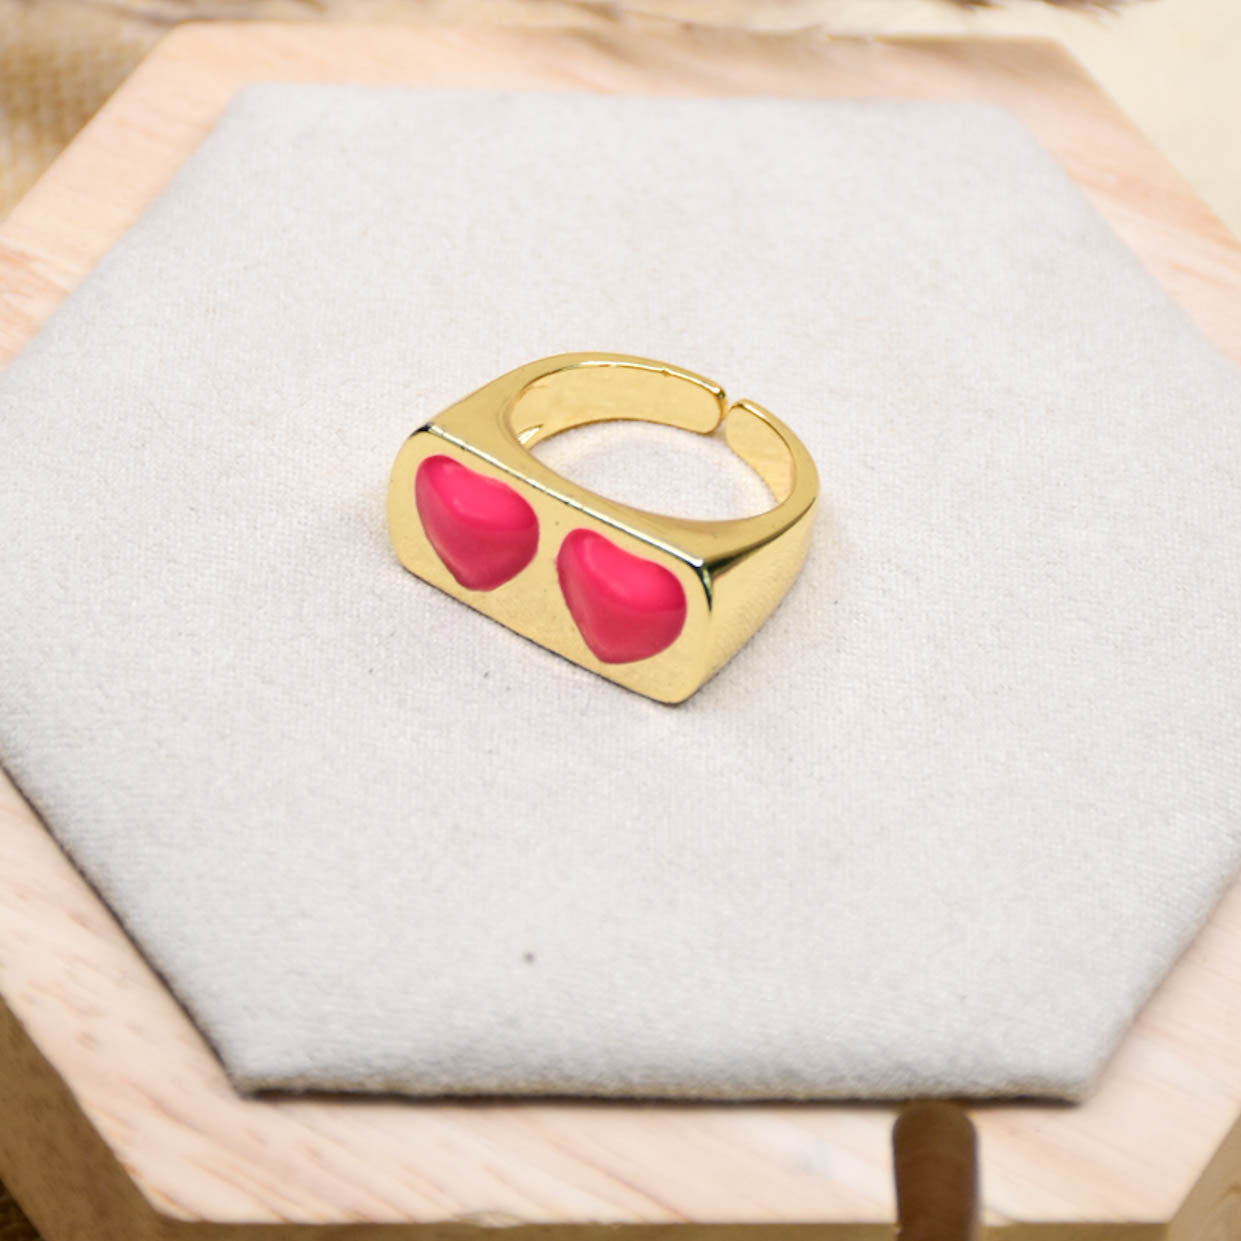 Lovey-Dovey Duo Pastel Ring